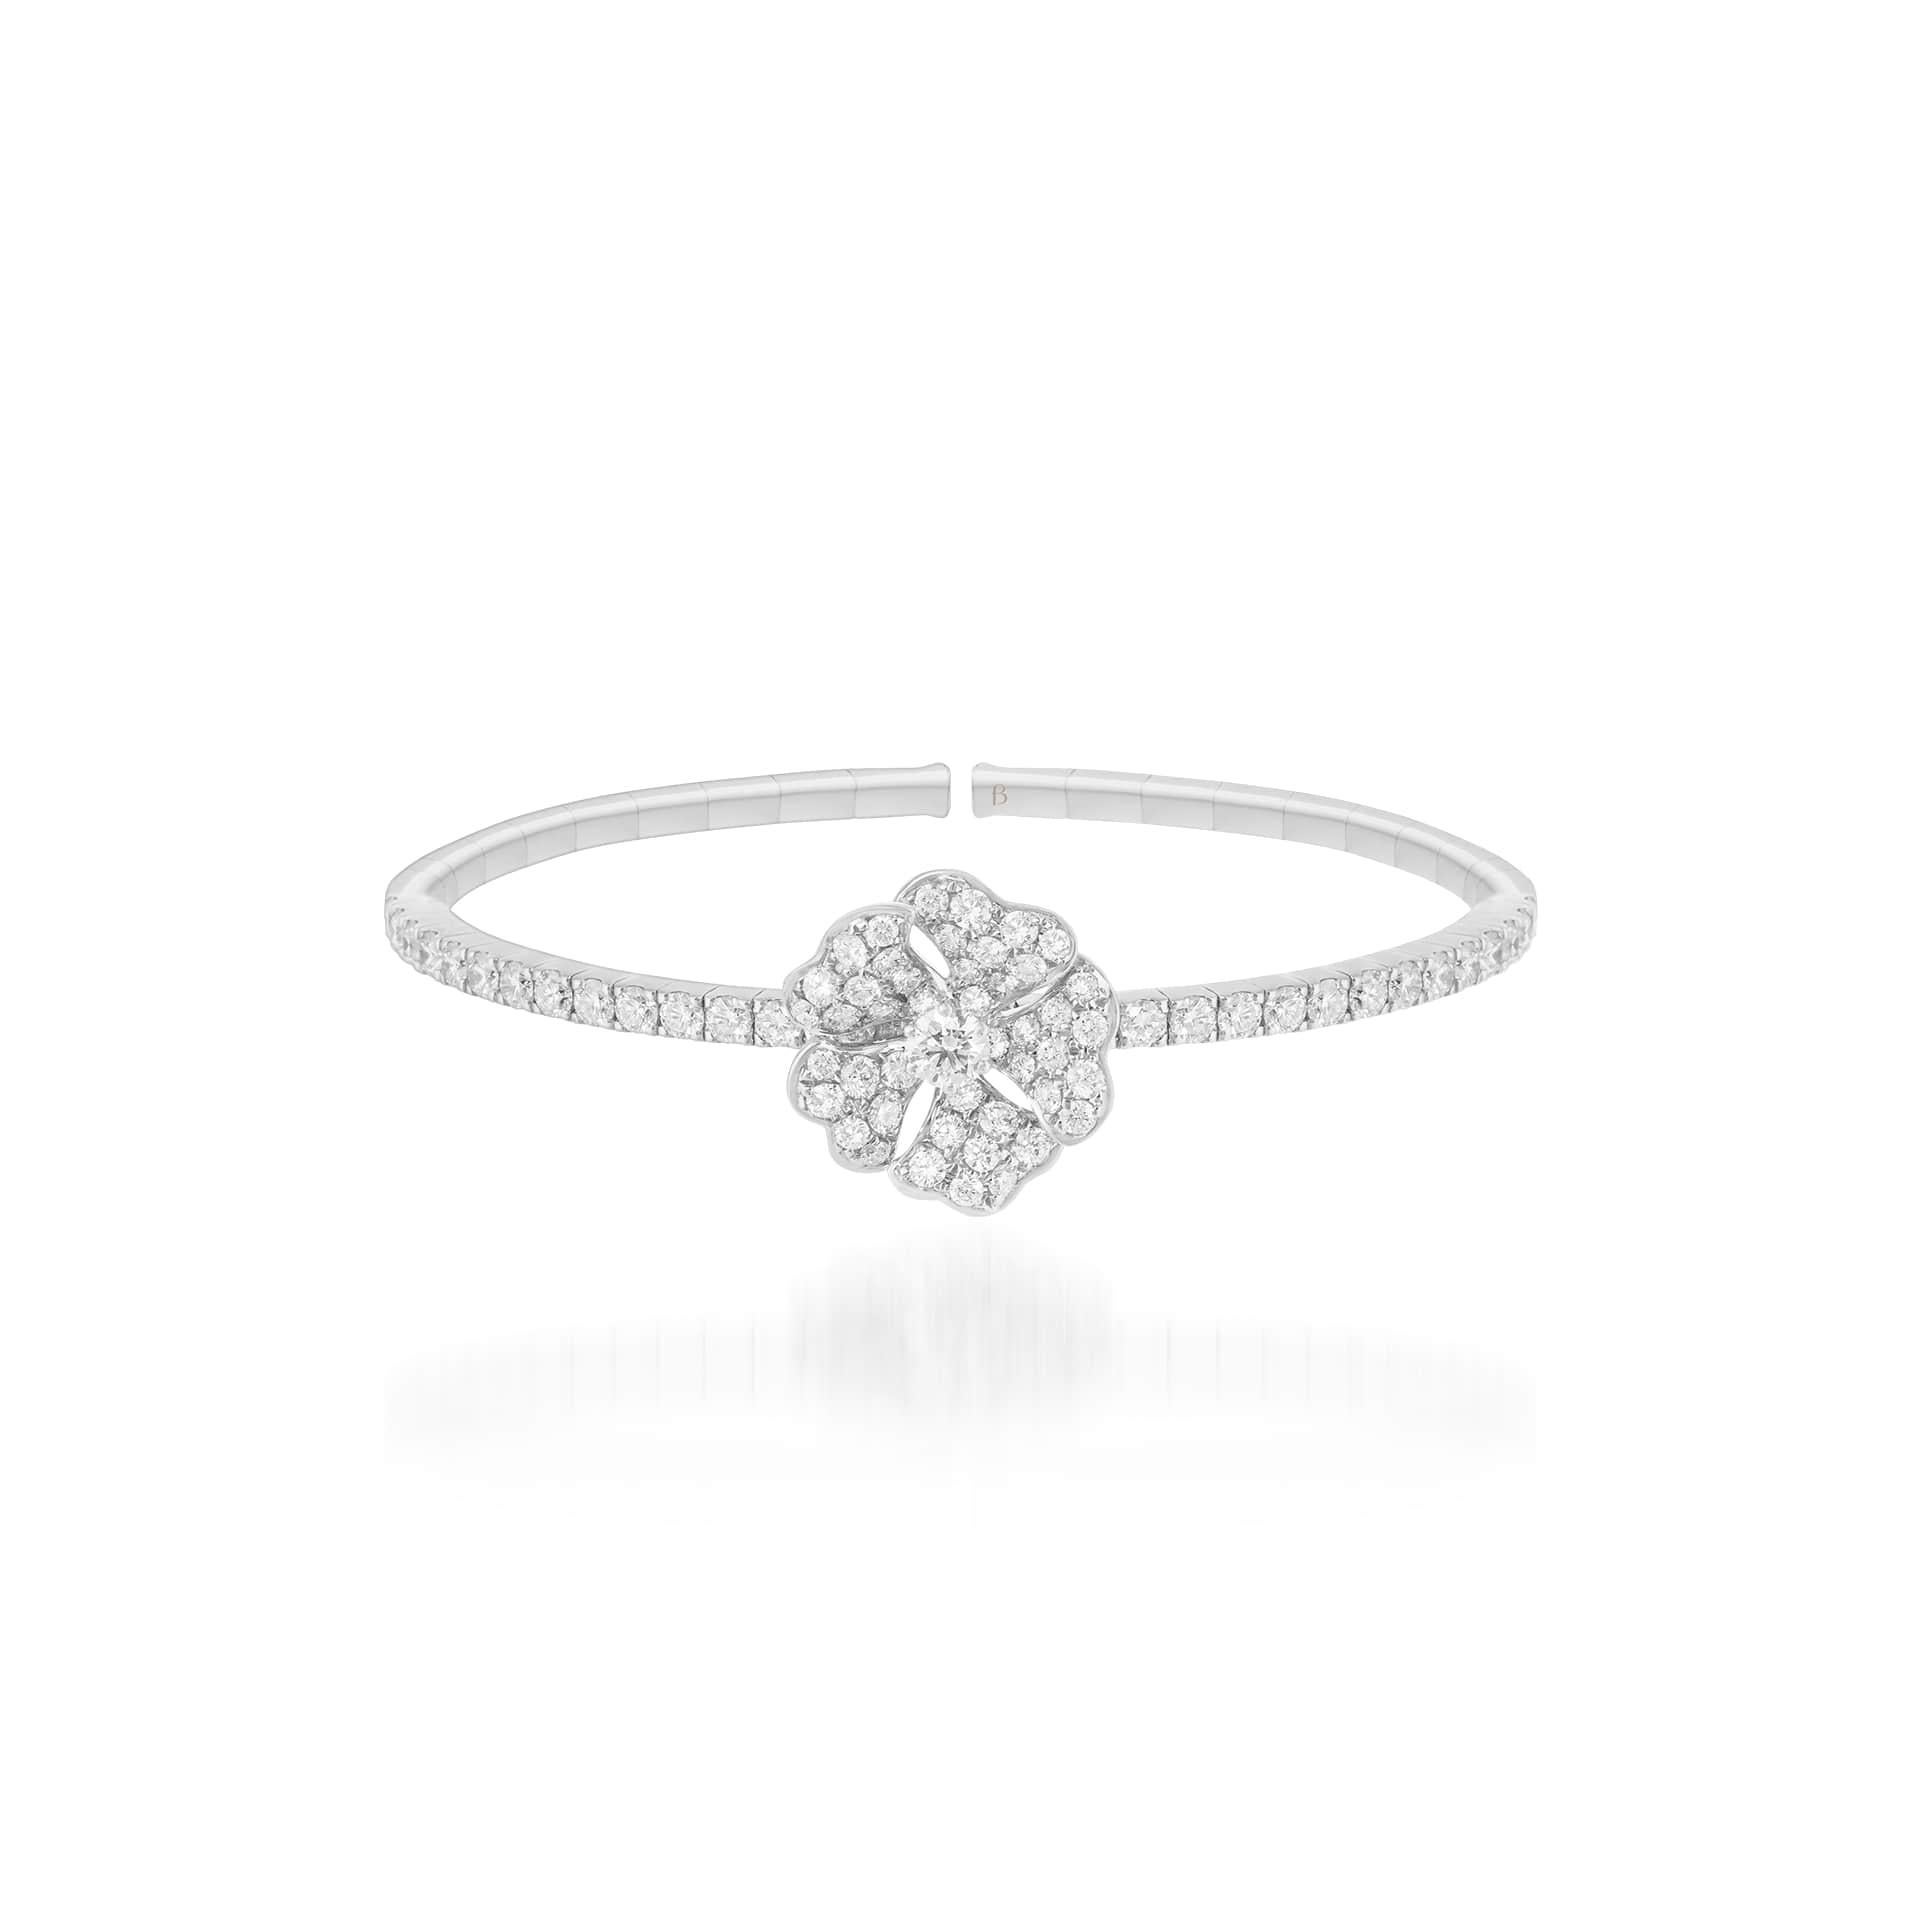 Bloom Diamond Solo Flower Bangle in 18K White Gold

Inspired by the exquisite petals of the alpine cinquefoil flower, the Bloom collection combines the richness of diamonds and precious metals with the light versatility of this delicate,